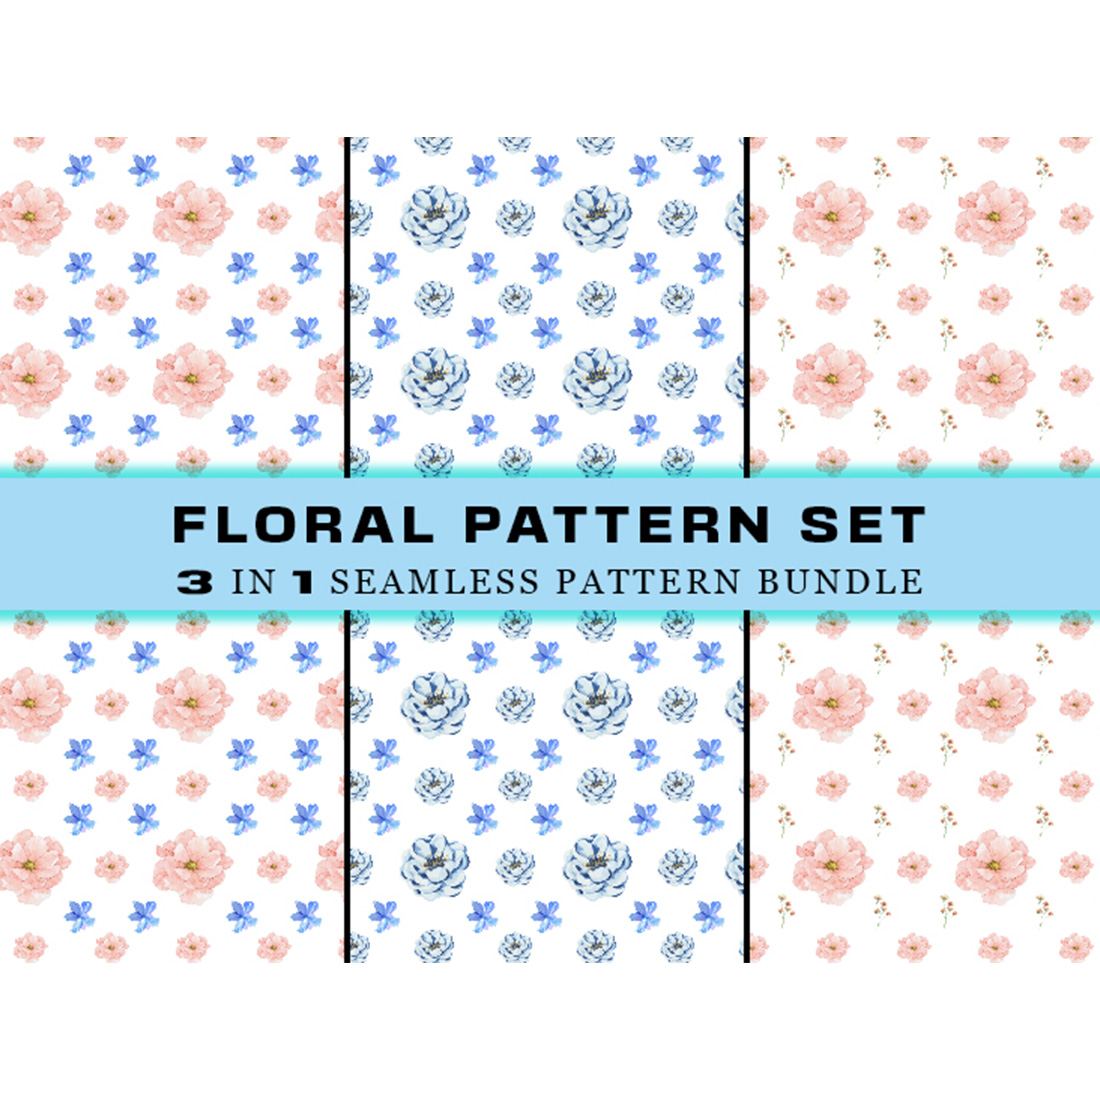 Flower Seamless Pattern Digital Papers V.3 main cover.